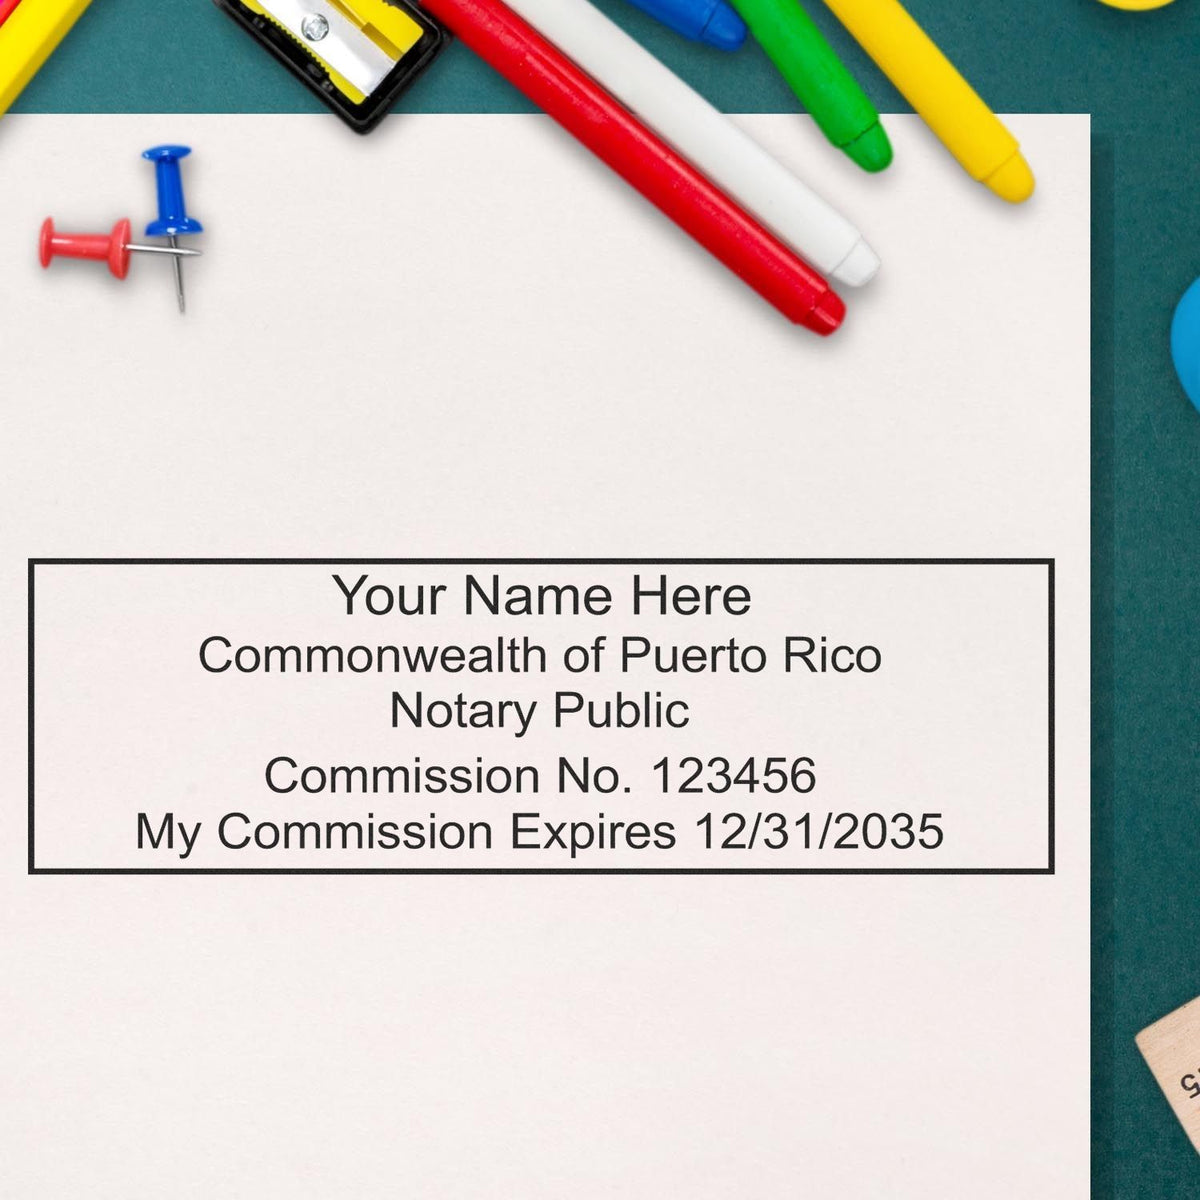 The Super Slim Puerto Rico Notary Public Stamp stamp impression comes to life with a crisp, detailed photo on paper - showcasing true professional quality.